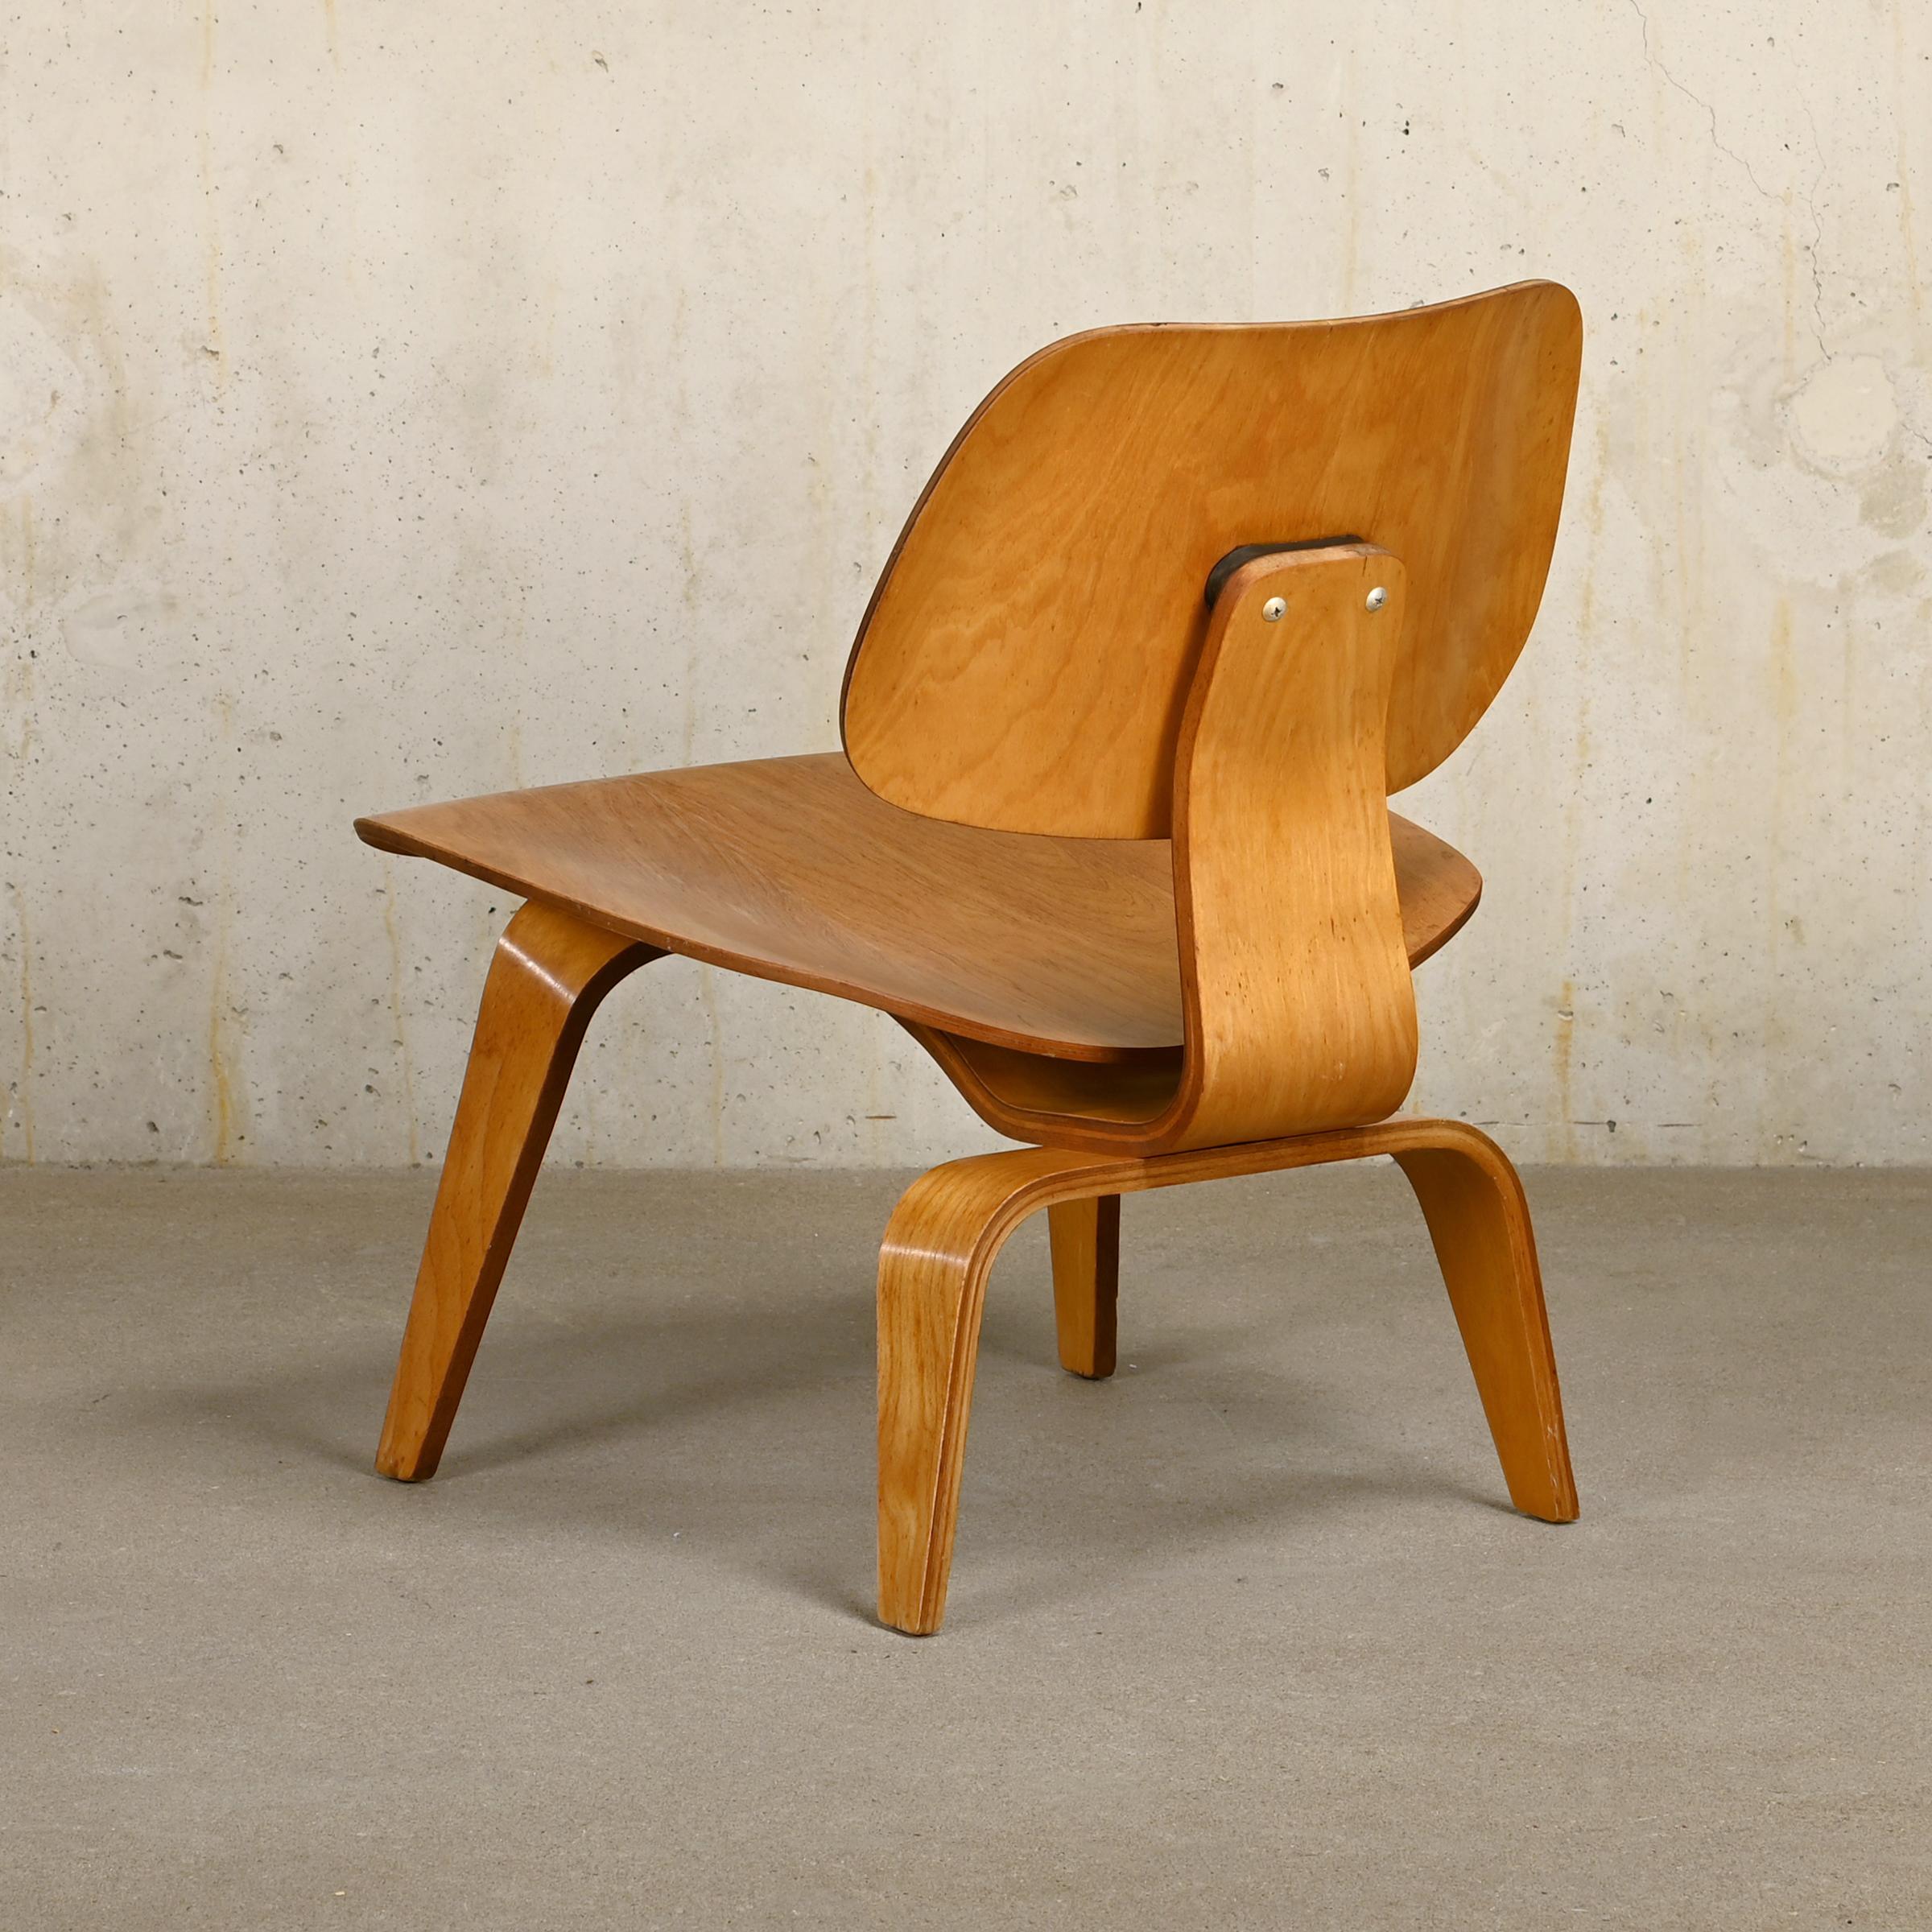 Mid-Century Modern Charles & Ray Eames vintage LCW Lounge Chair in Ash Plywood for Herman Miller